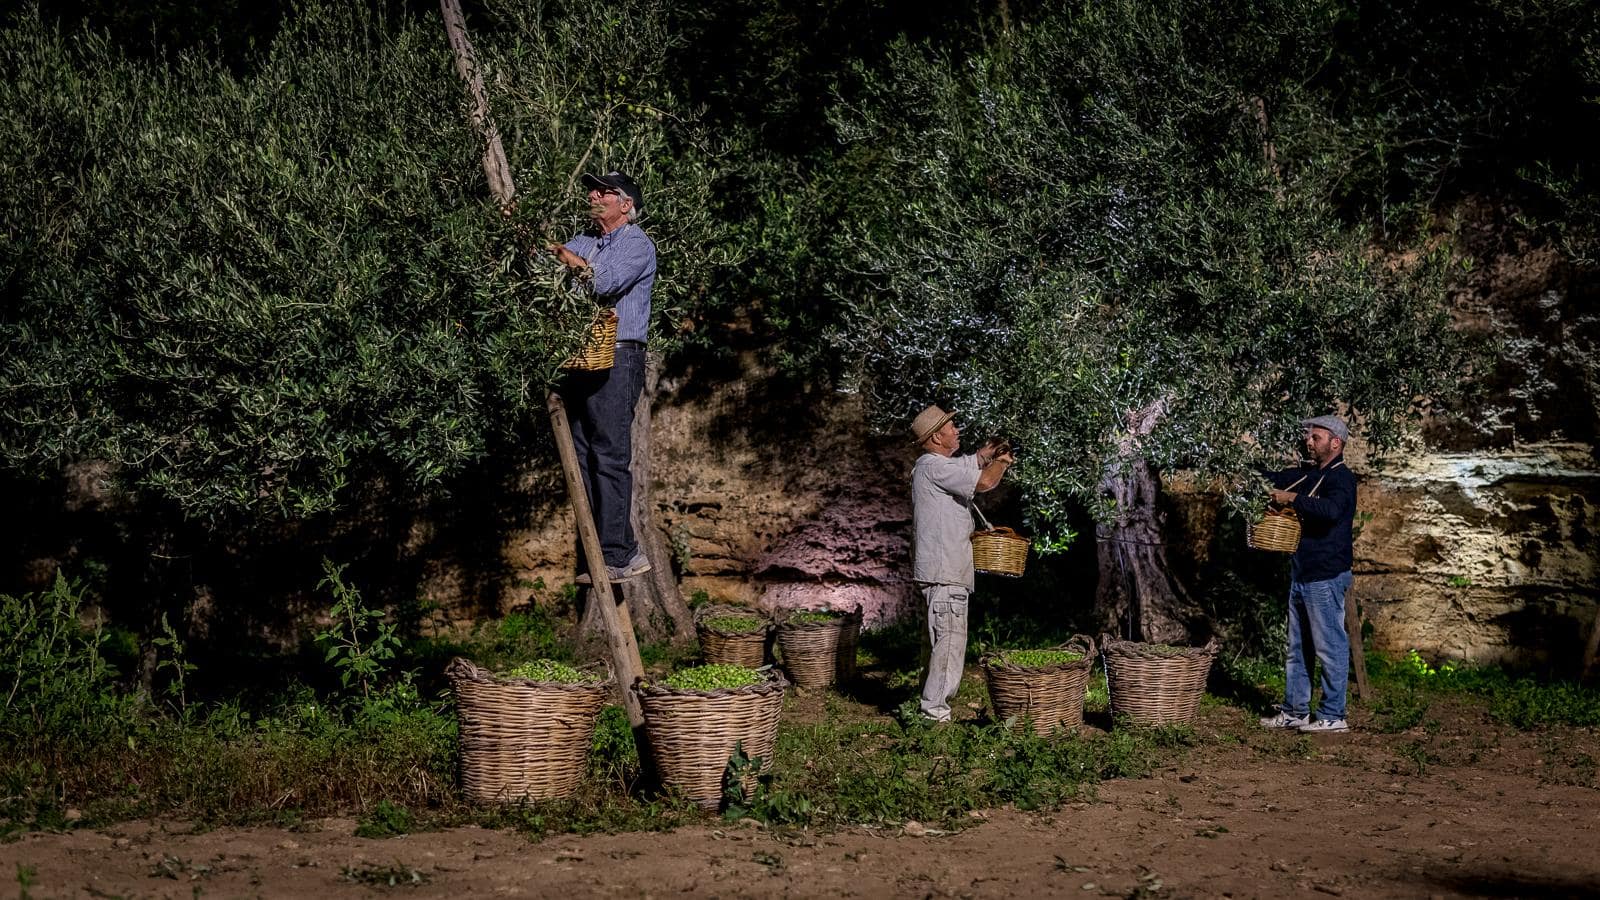 europe-profiles-the-best-olive-oils-production-business-centonze-a-forwardlooking-farm-rooted-in-sicilys-history-olive-oil-times